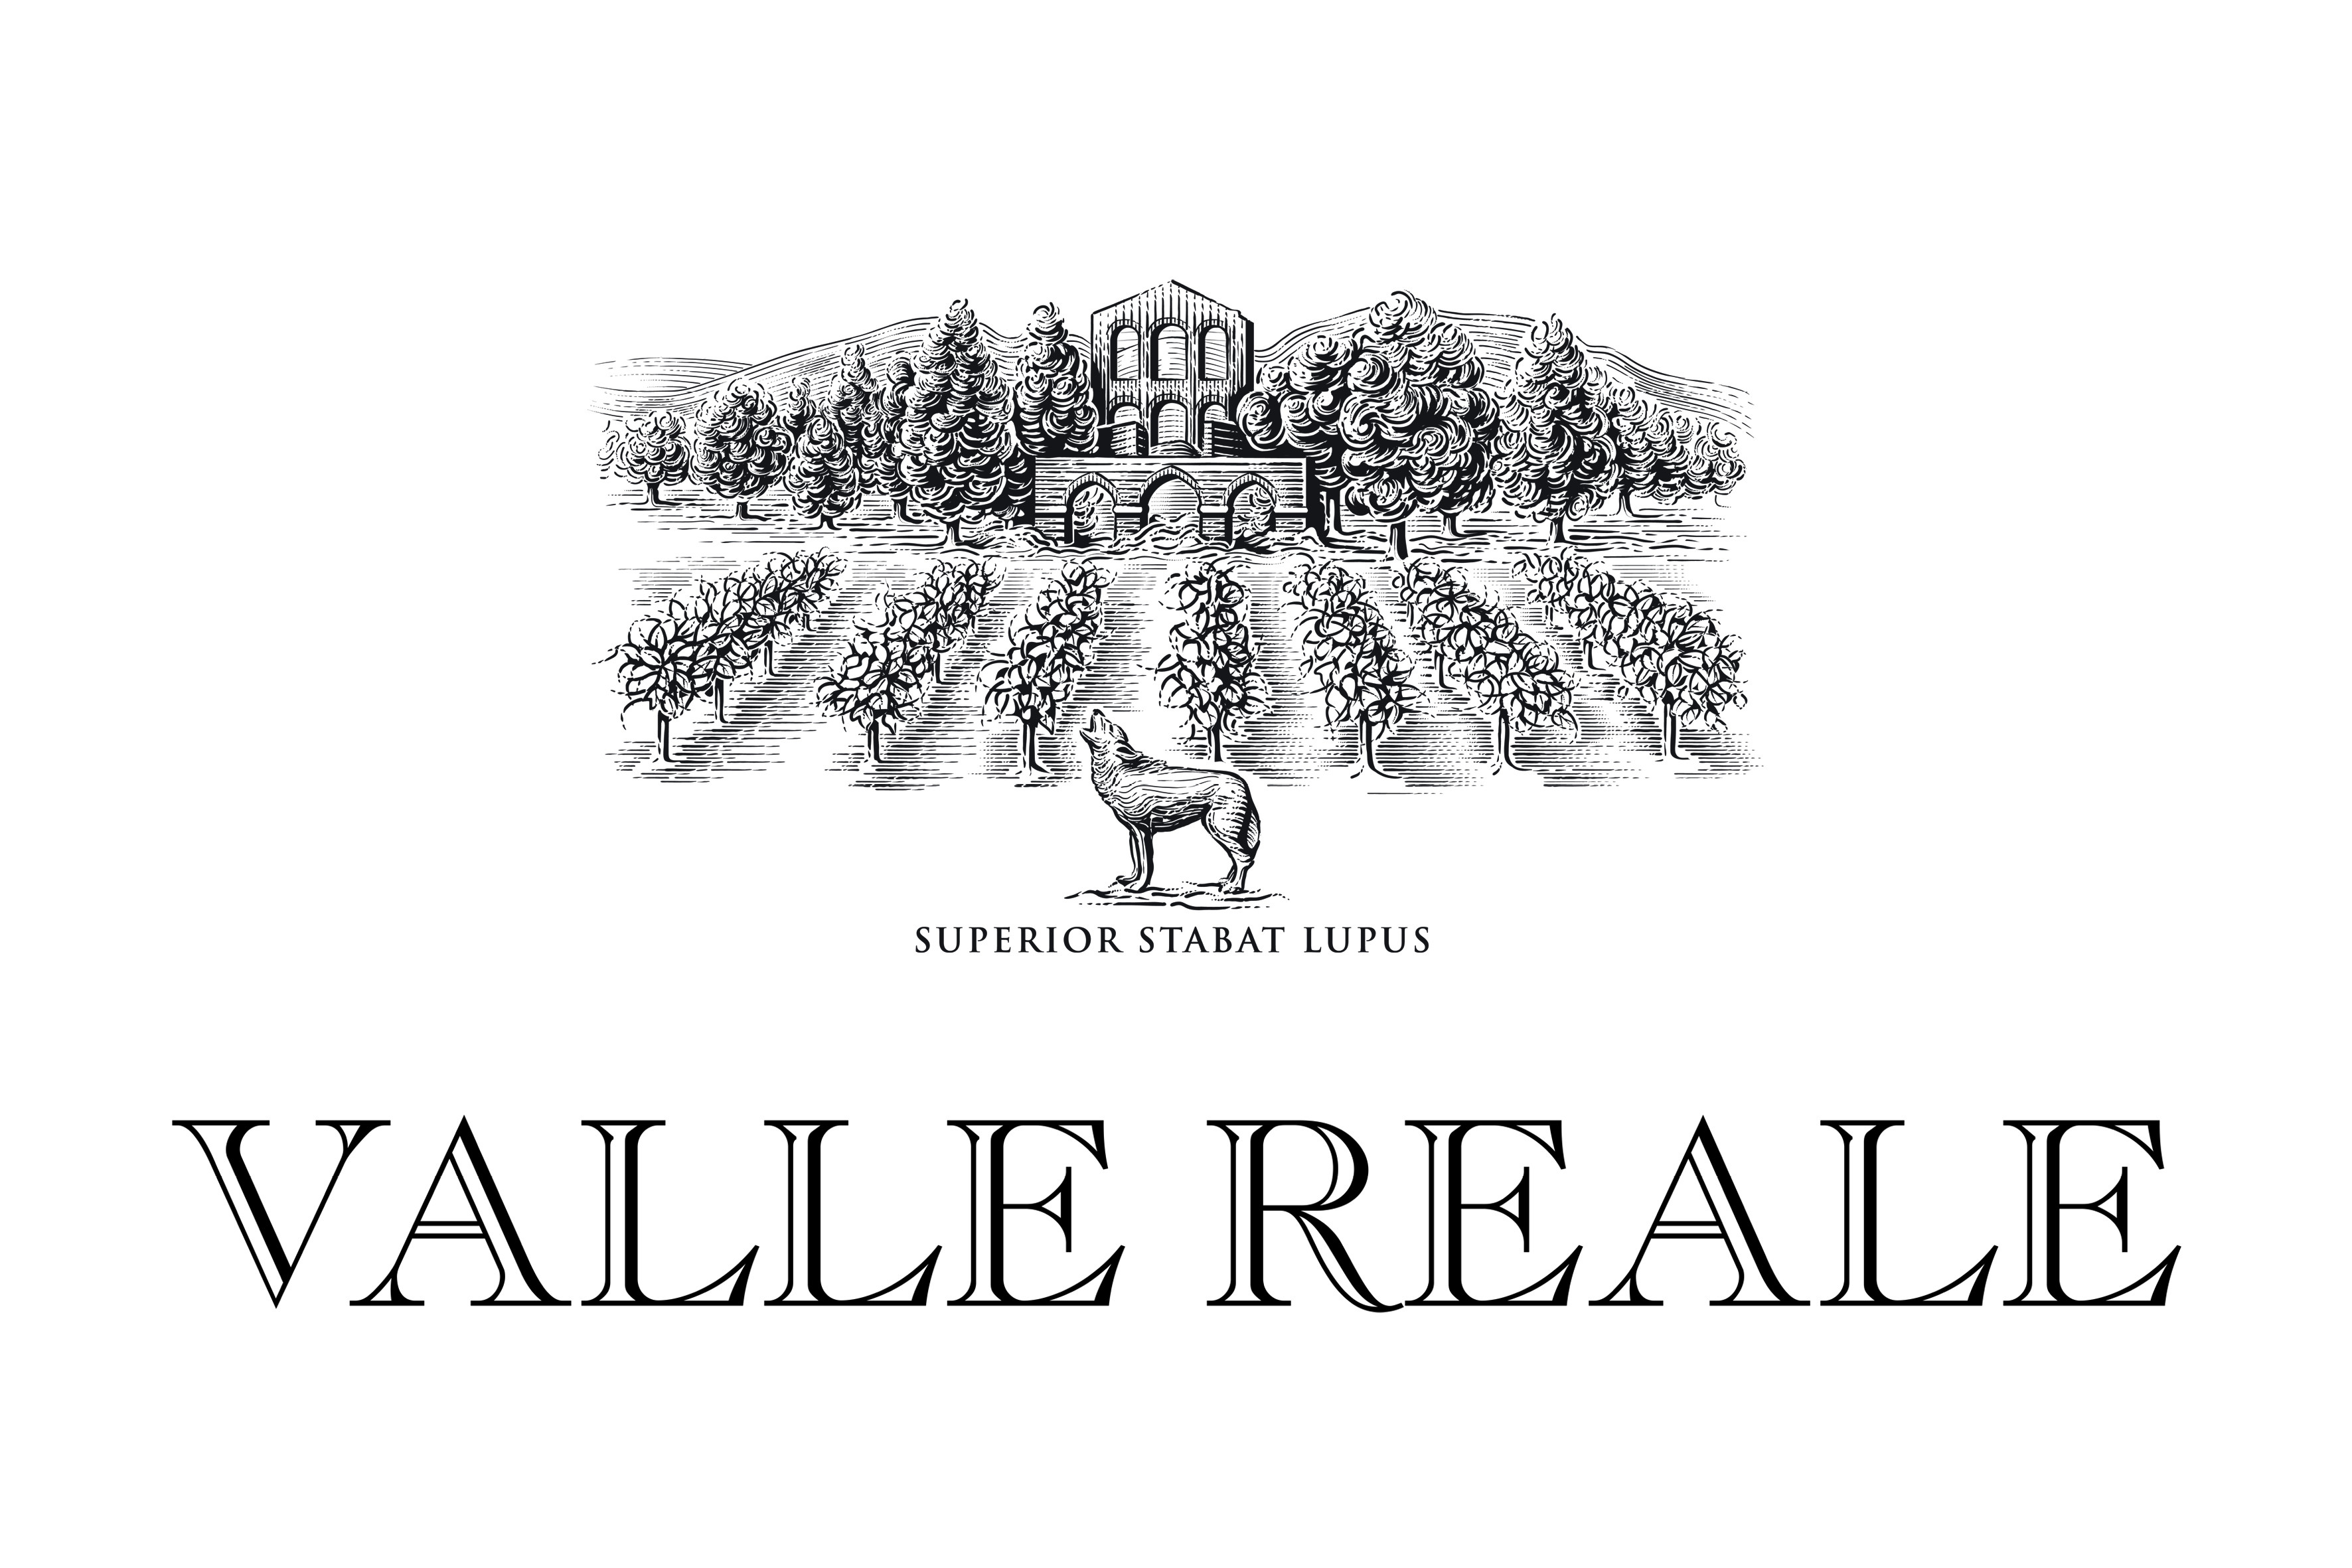 Valle Reale